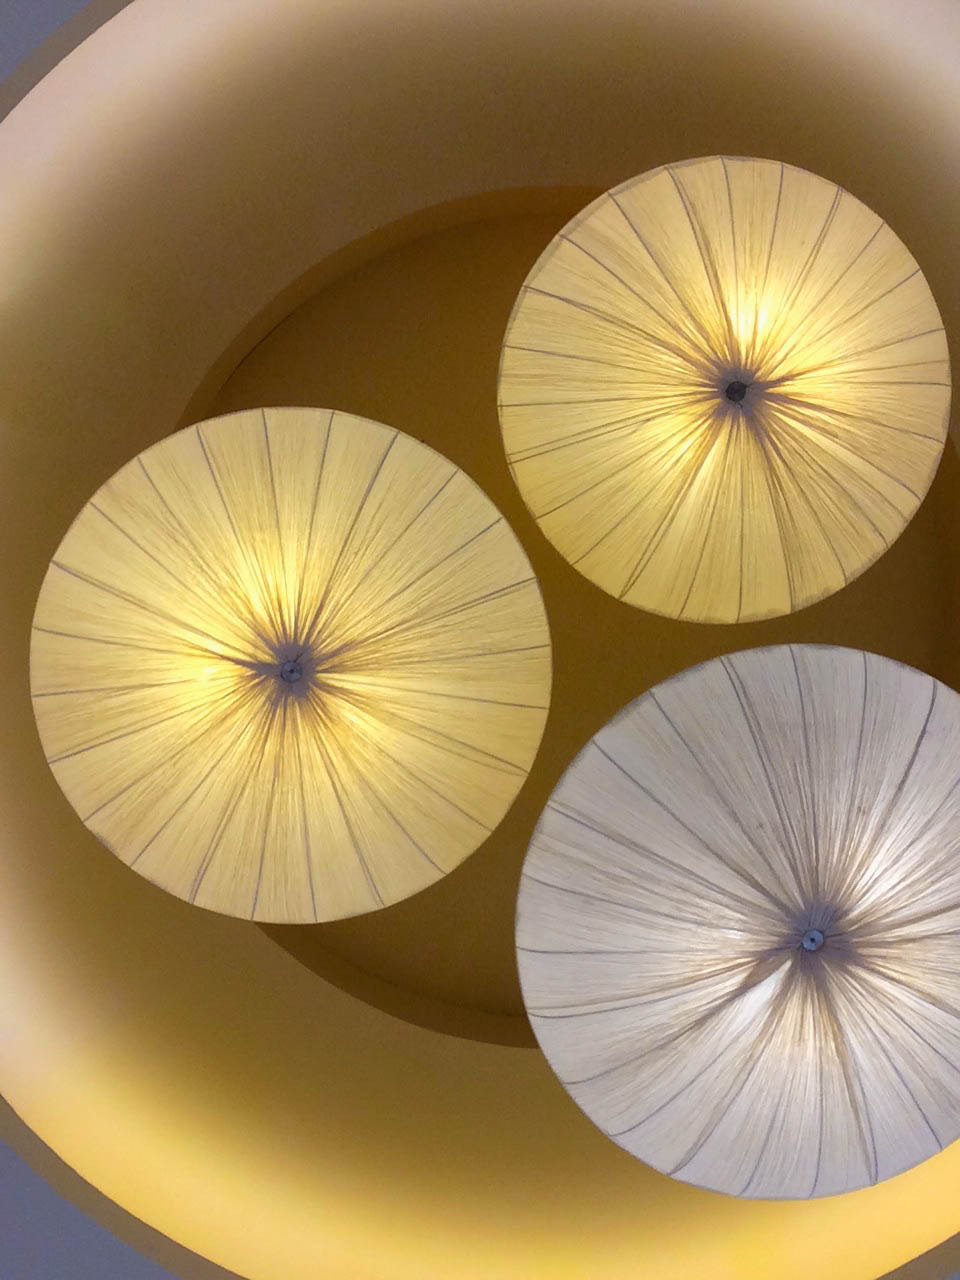 Apple iPhone 5s + iPhone 5s front camera 2.15mm f/2.4 sample photo. Ceiling lamp photography